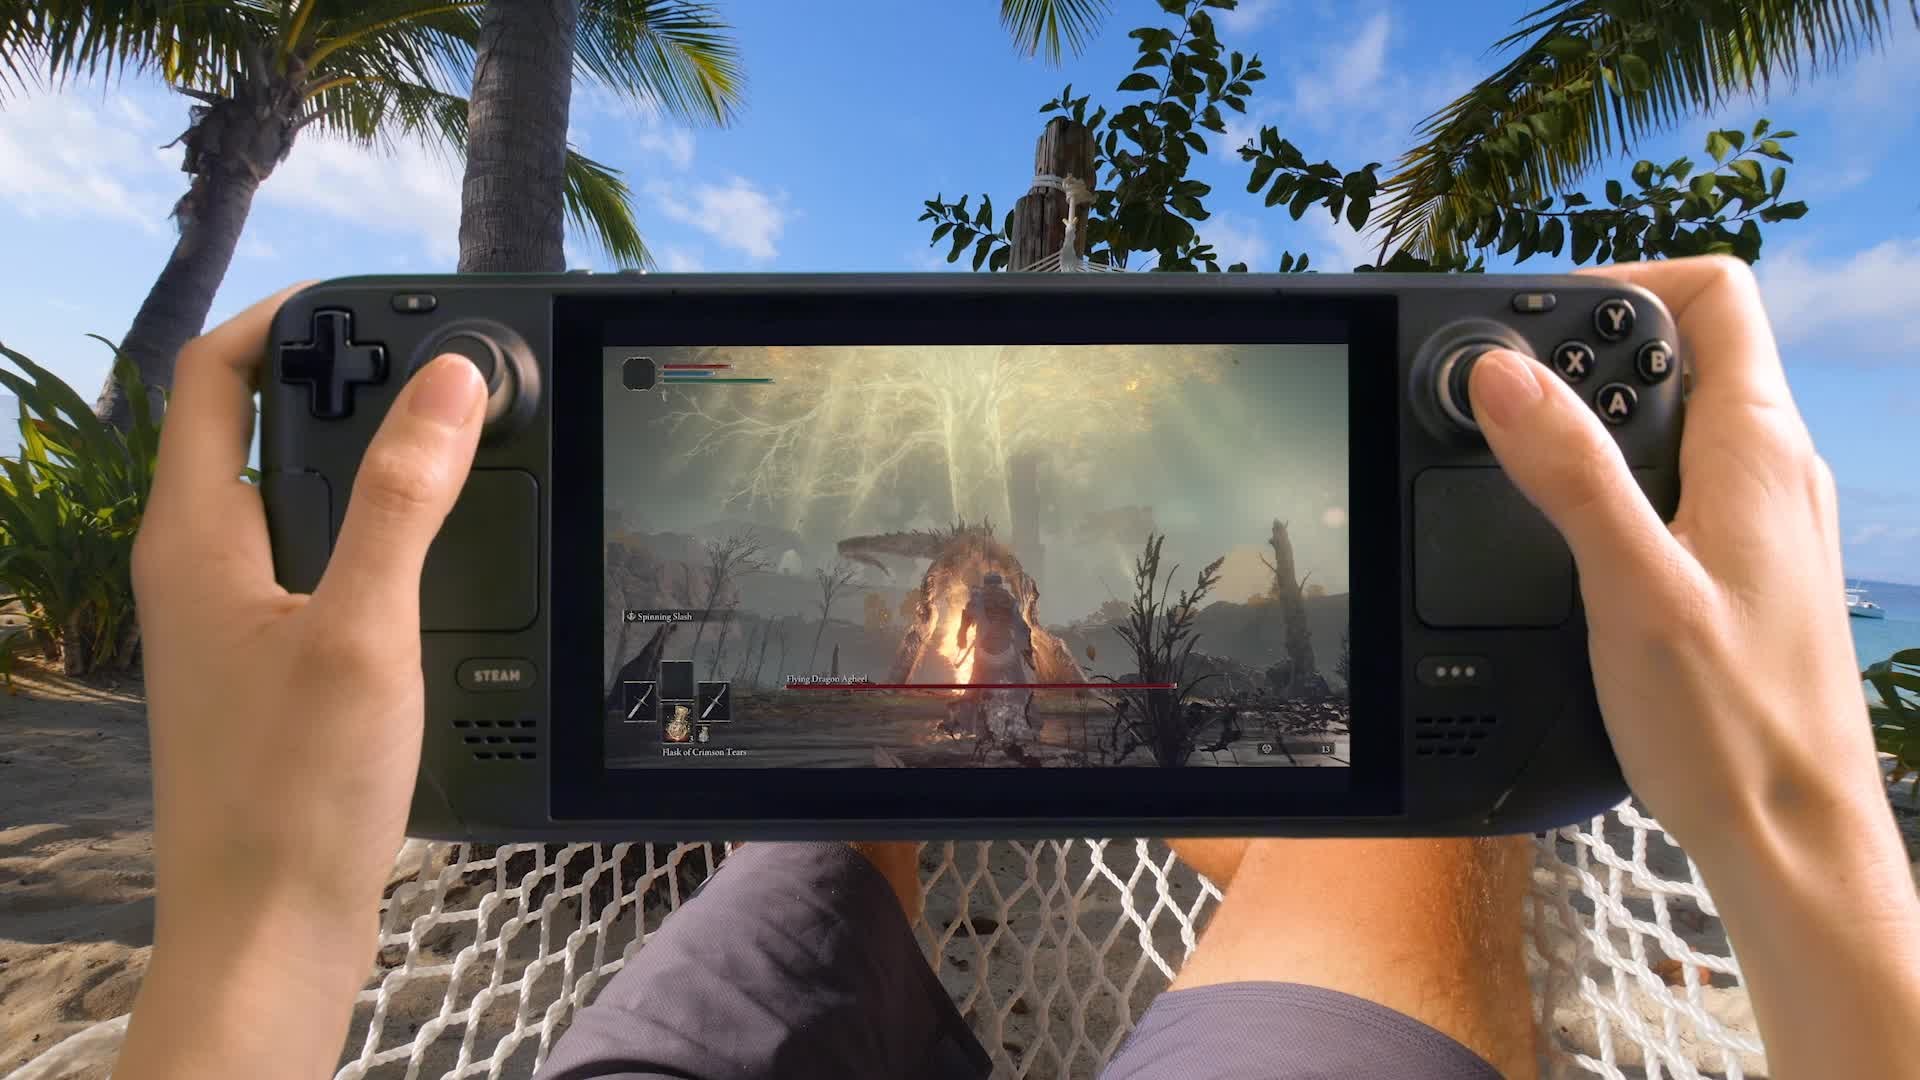 Will Logitech's Gaming Handheld be better than the Steam Deck - SD 1